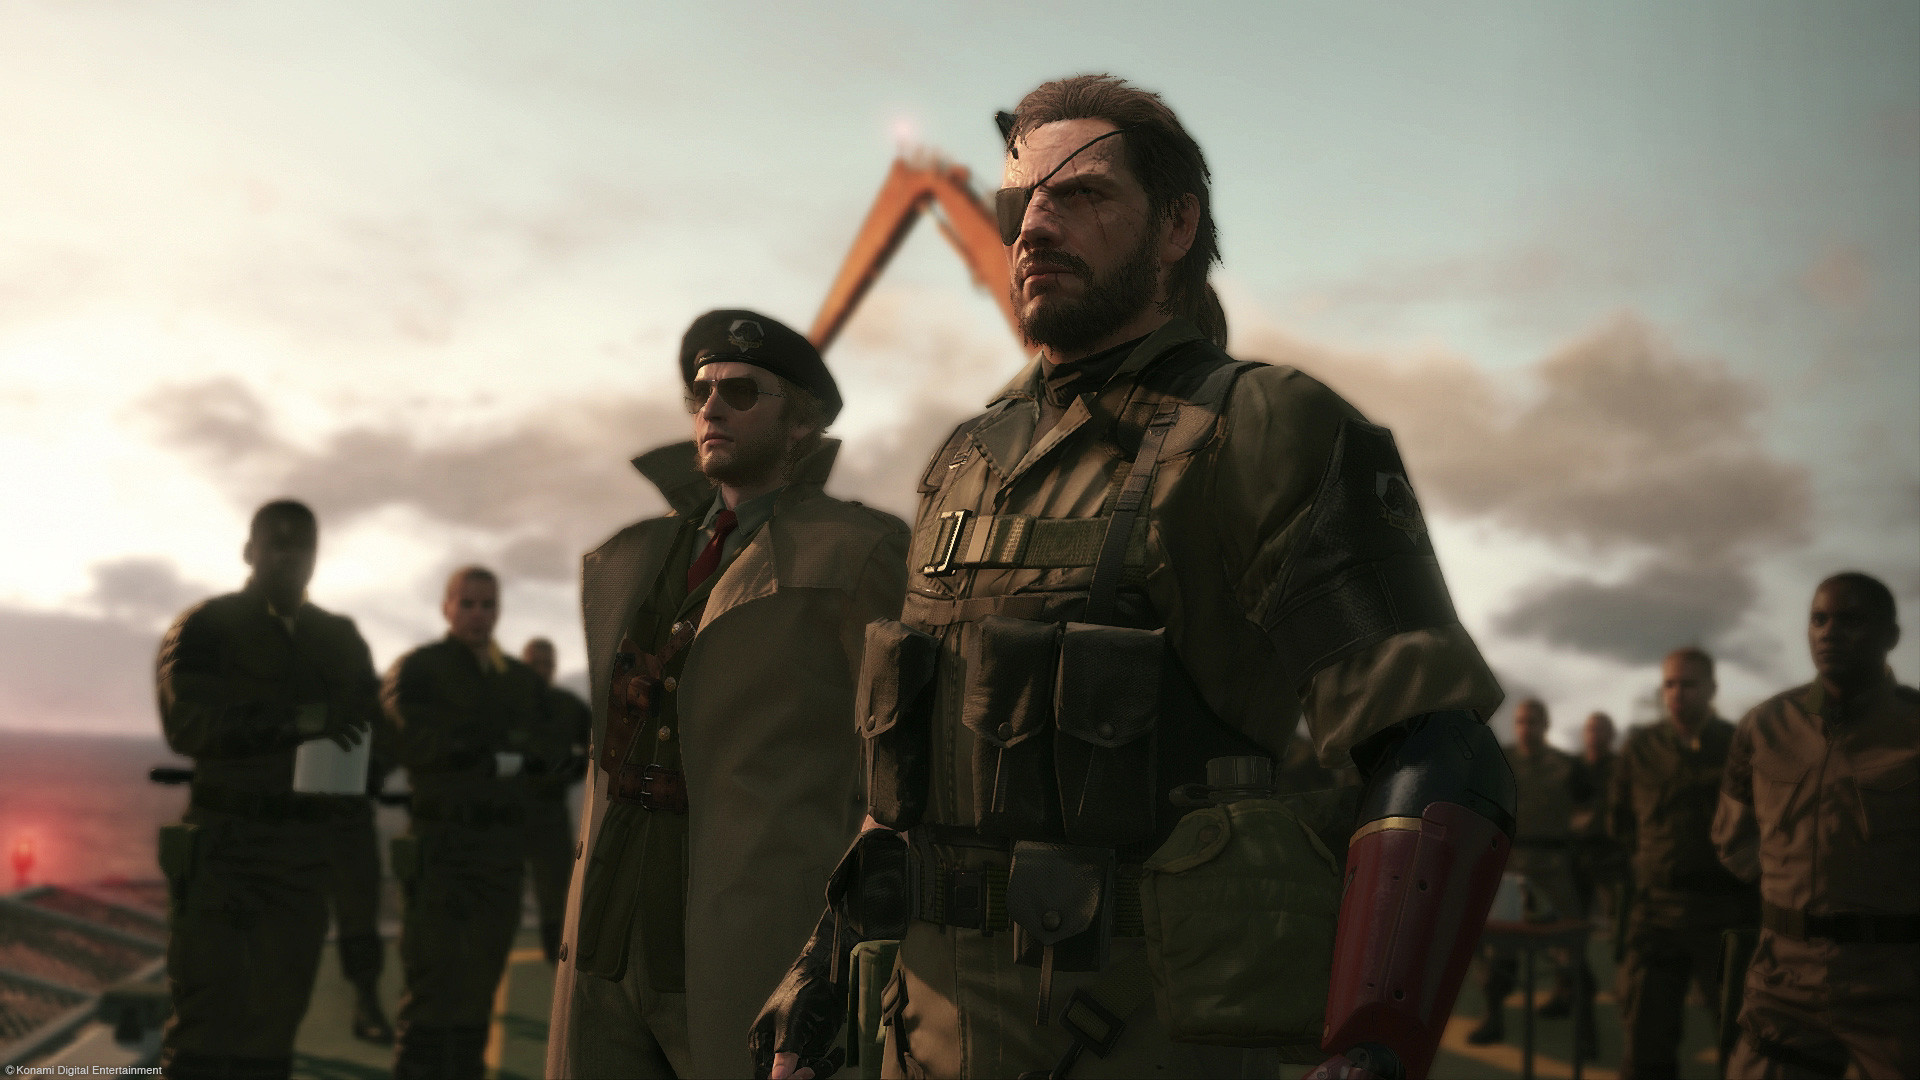 1920x1080 E3 2014: Making Peace in Metal Gear Solid 5: The Phantom Pain - GameSpot